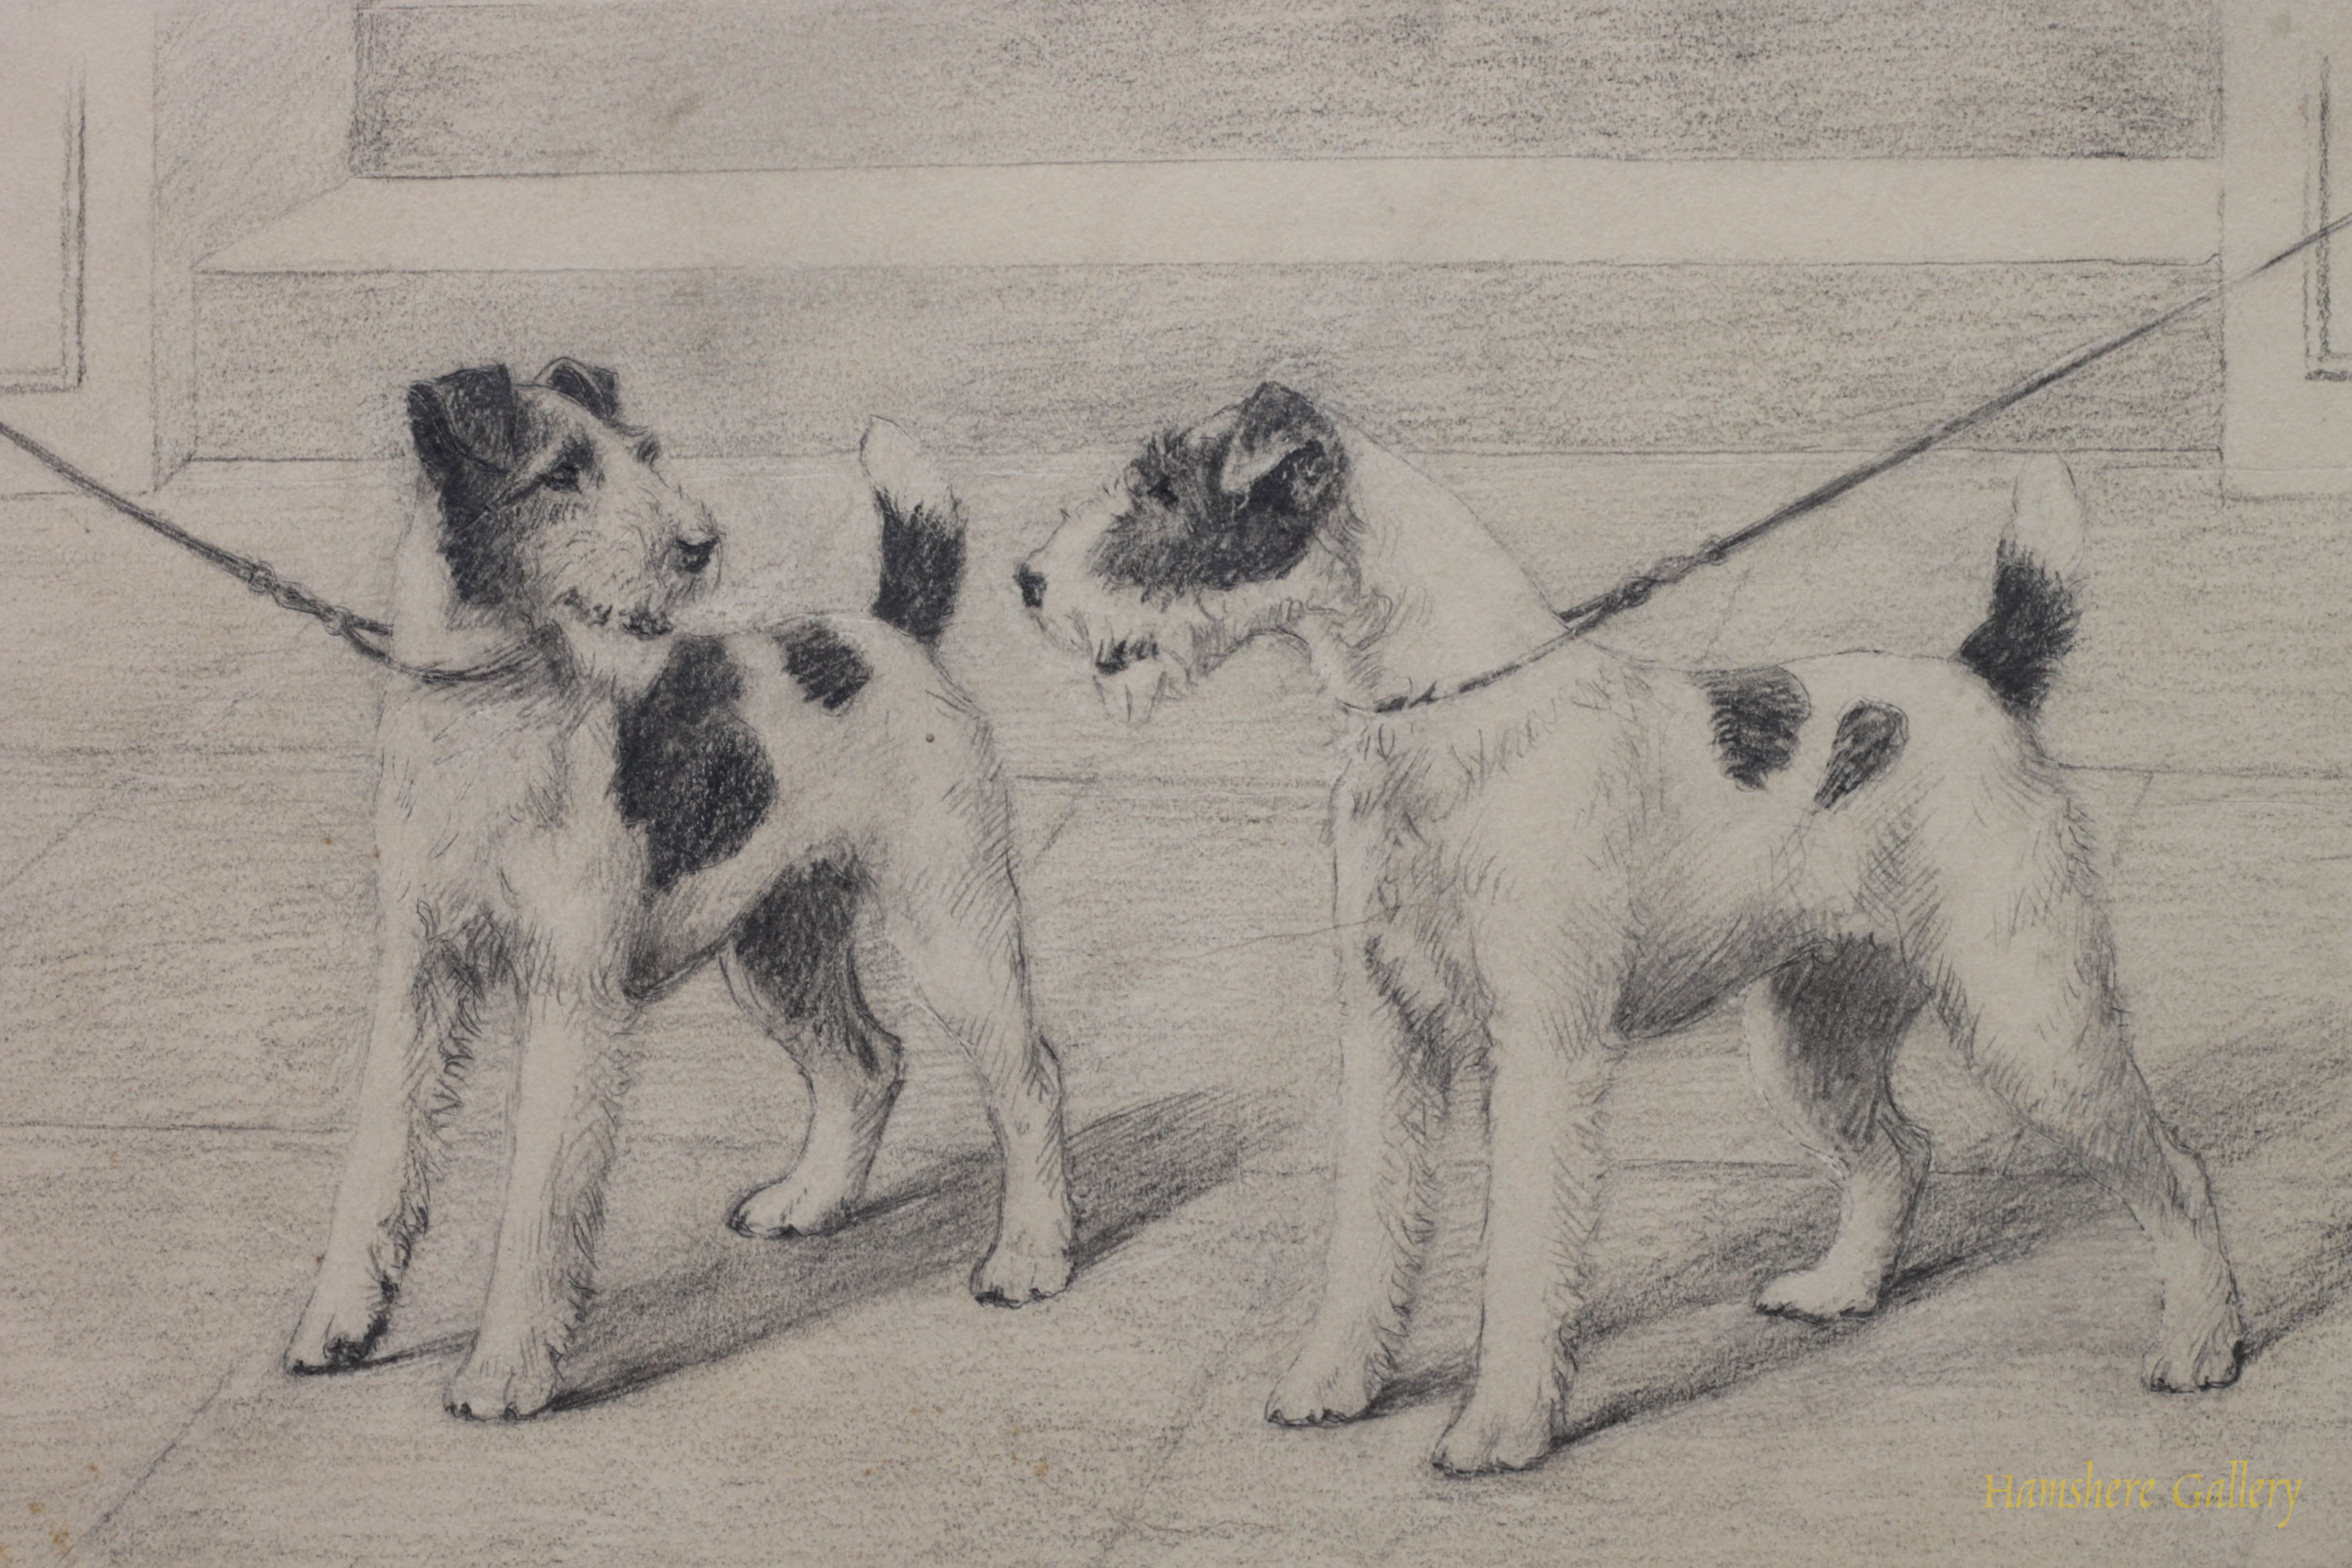 Click for larger image: Fox Terrier pencil drawing And Who Are You by Marguerite Kirmse - Fox Terrier pencil drawing And Who Are You by Marguerite Kirmse